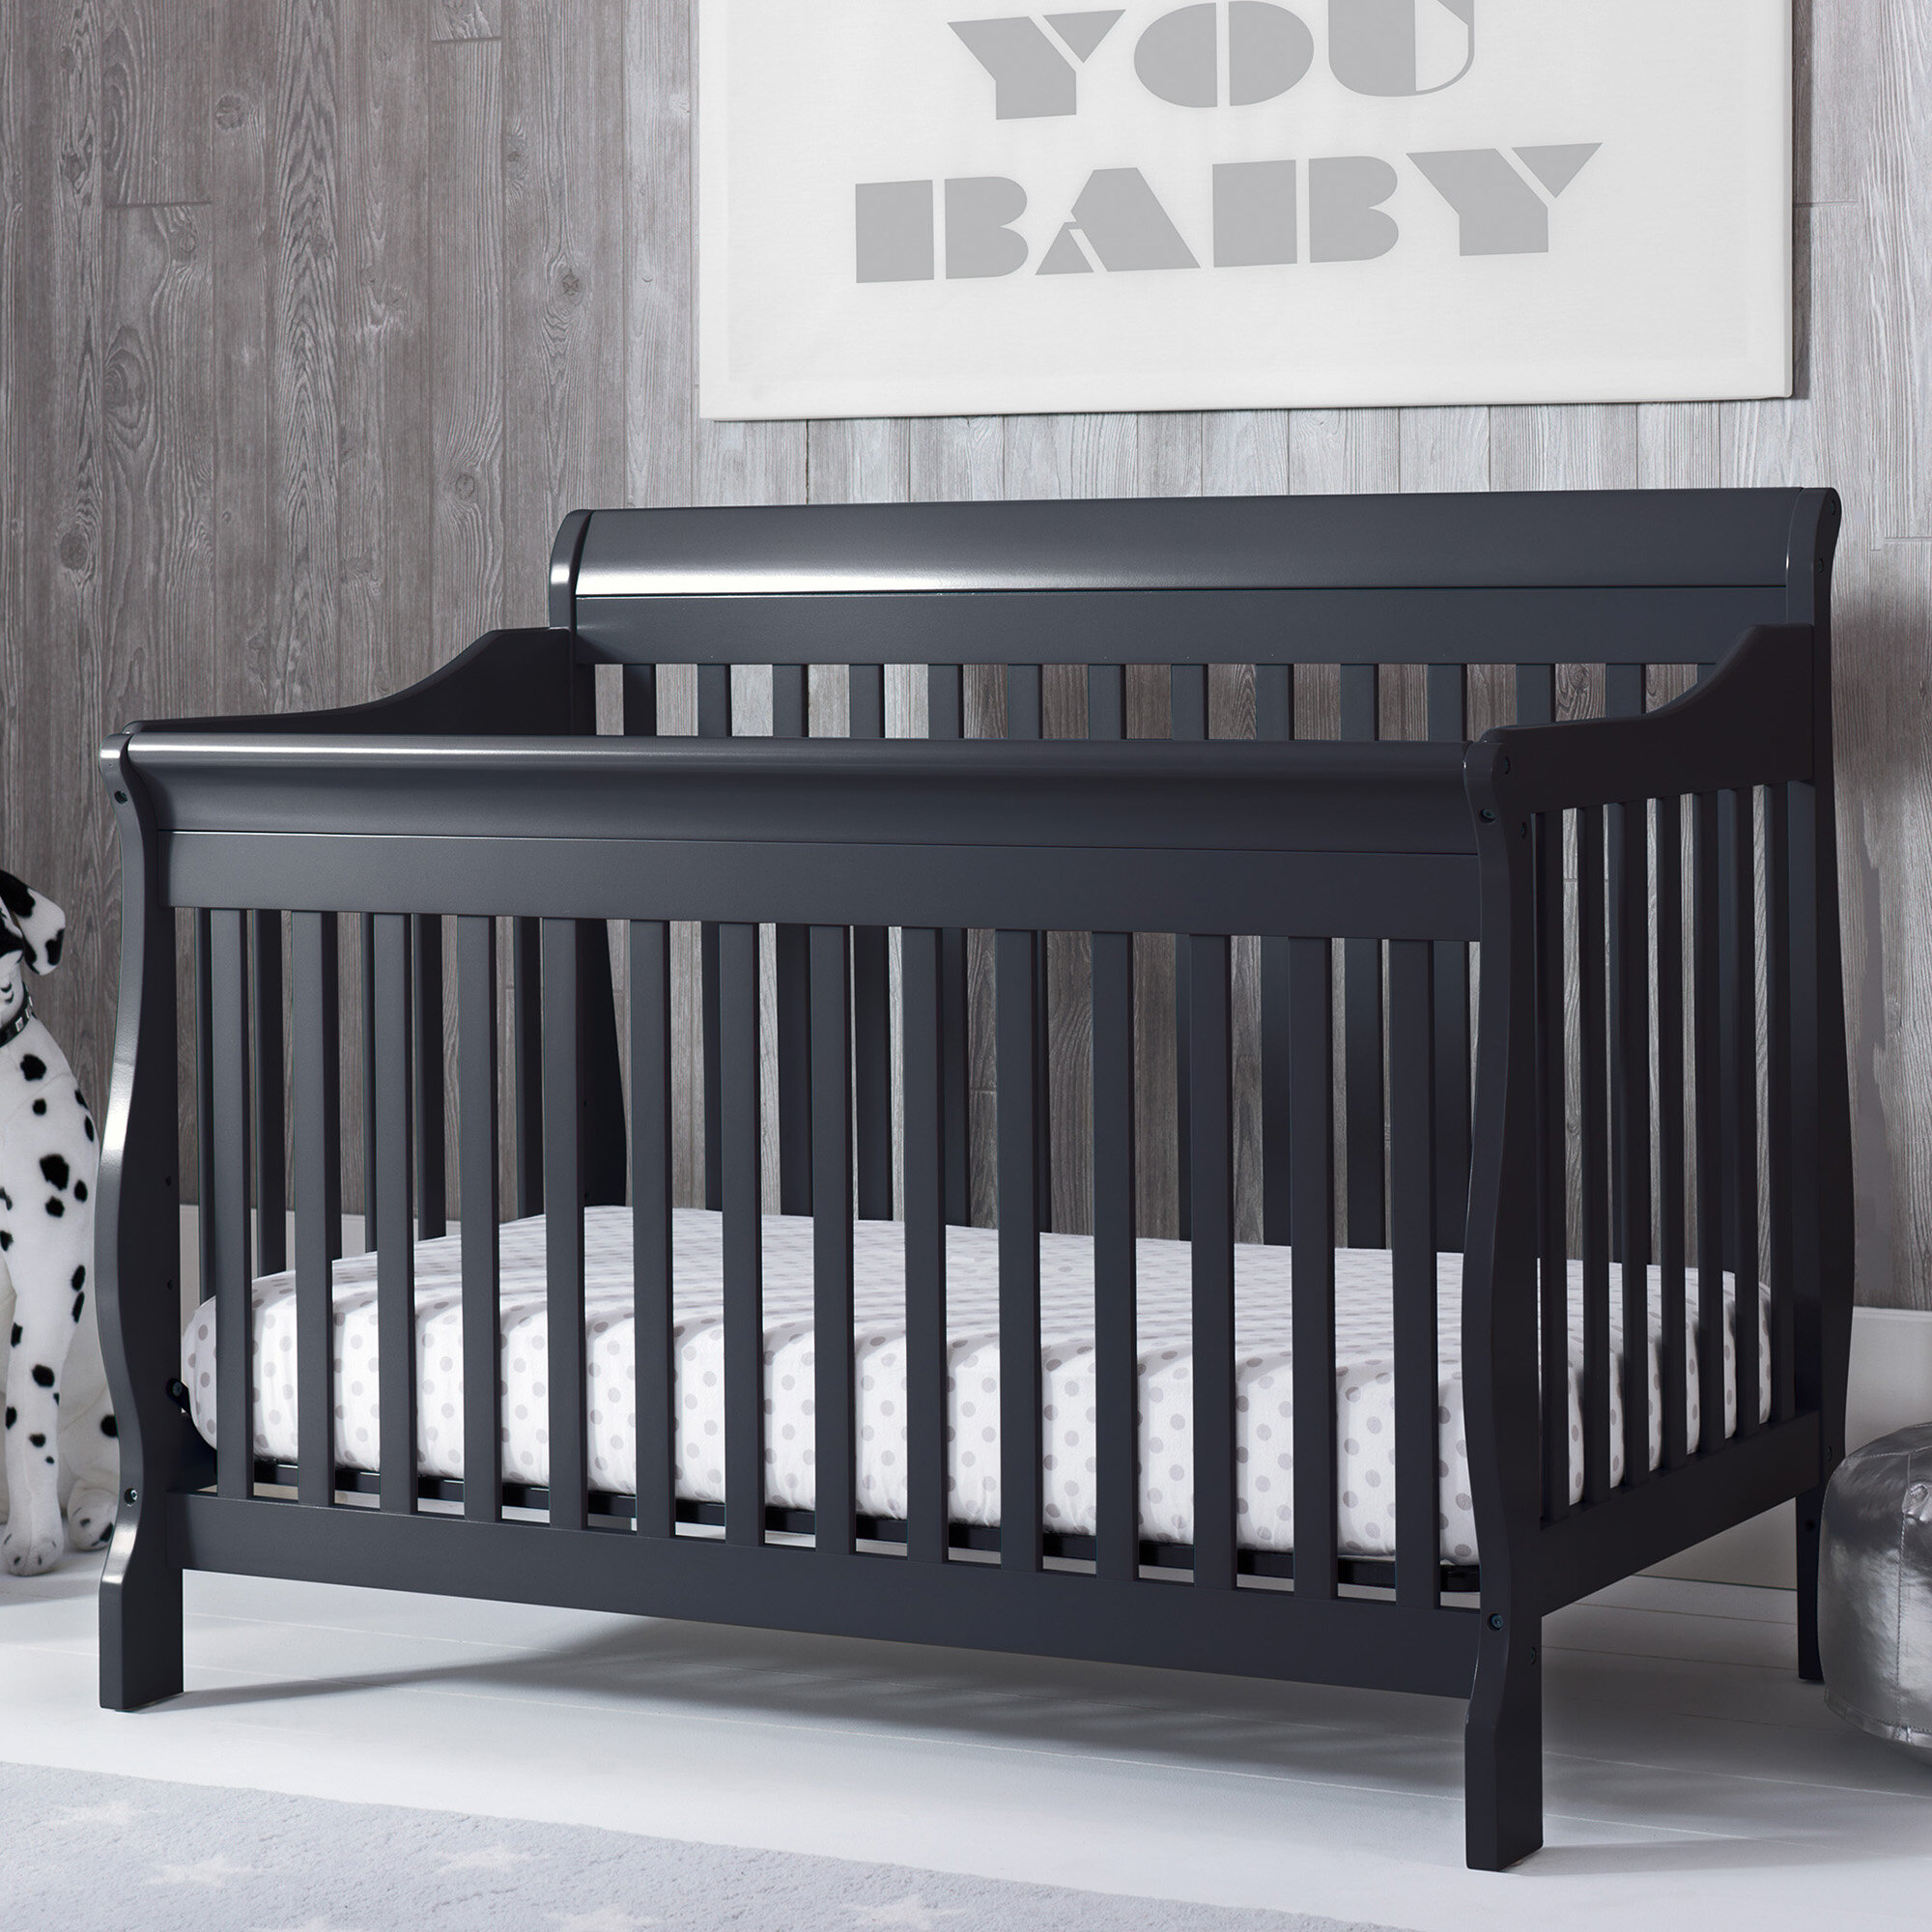 value city furniture baby cribs